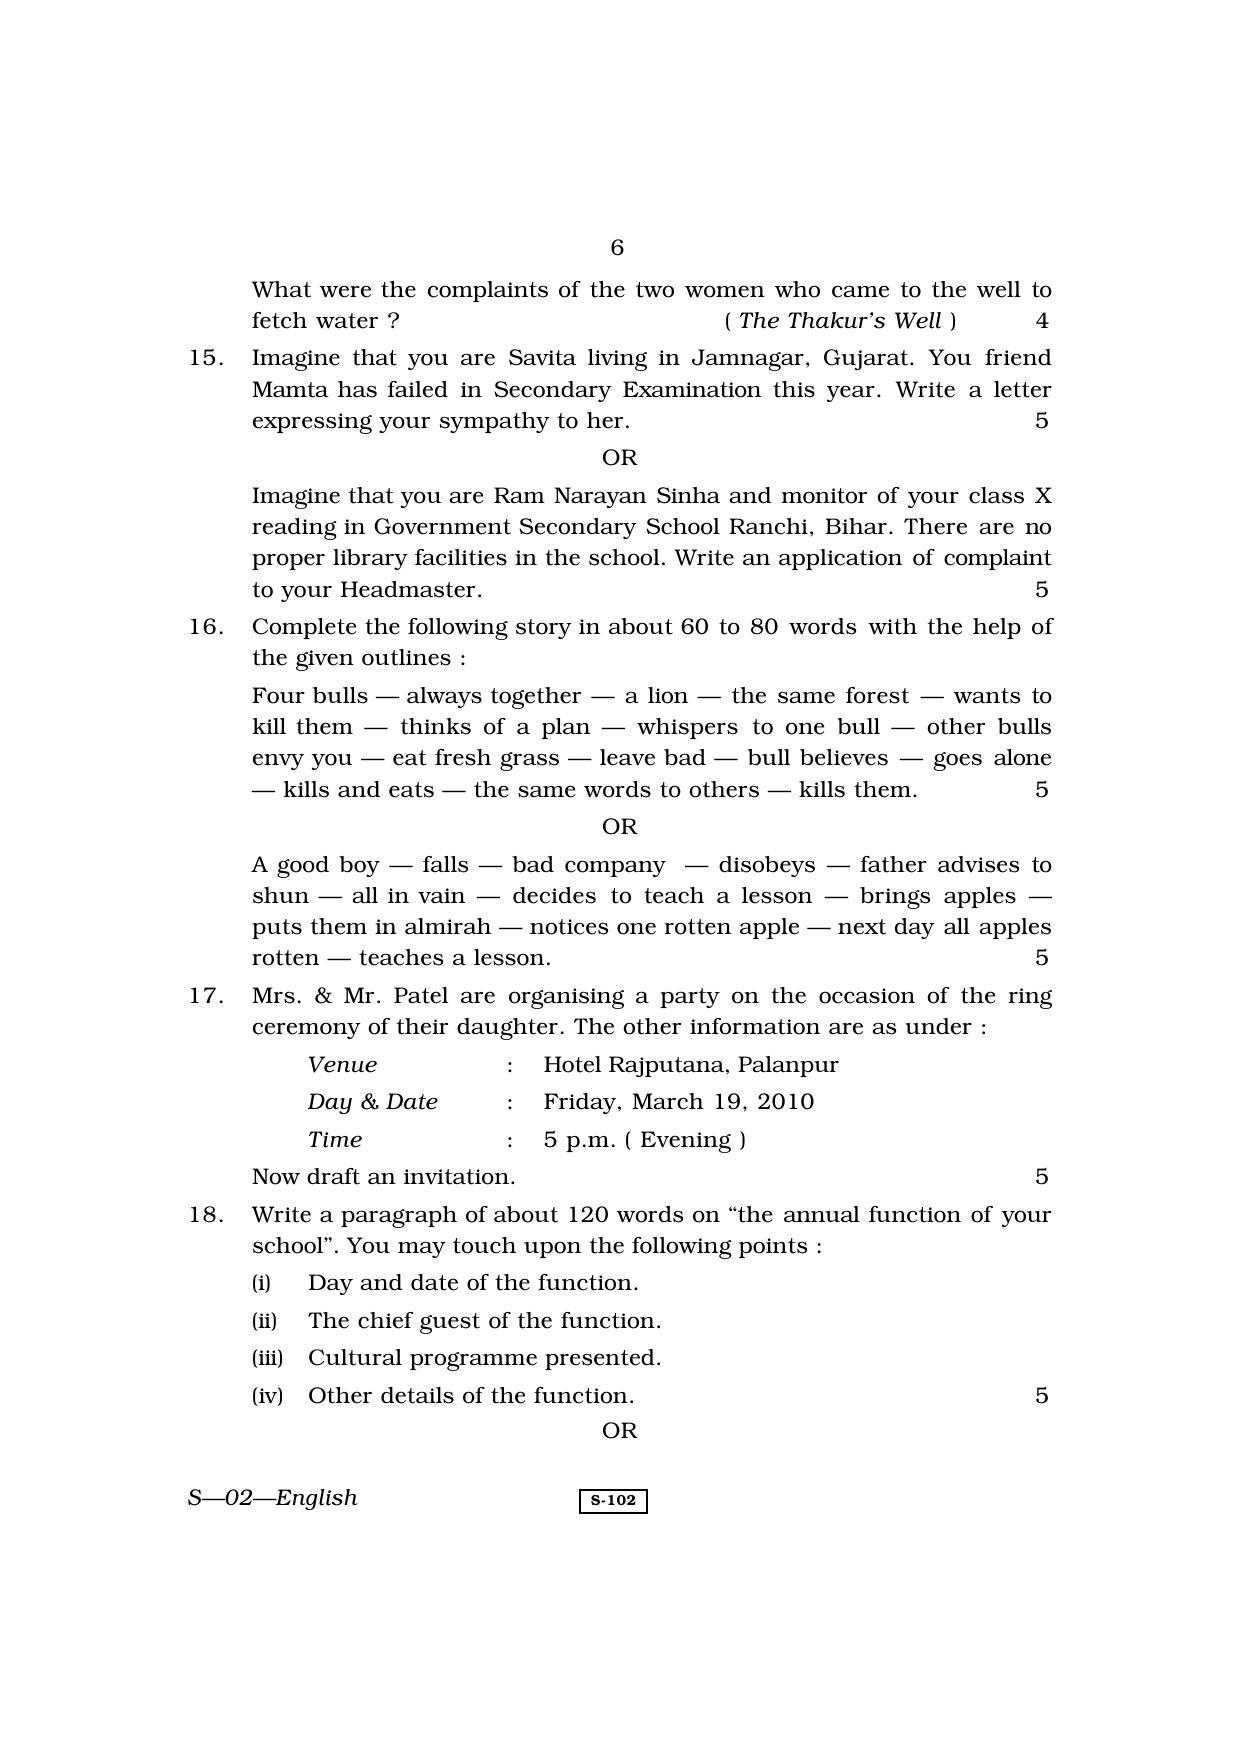 RBSE Class 10 English 2010 Question Paper - Page 6